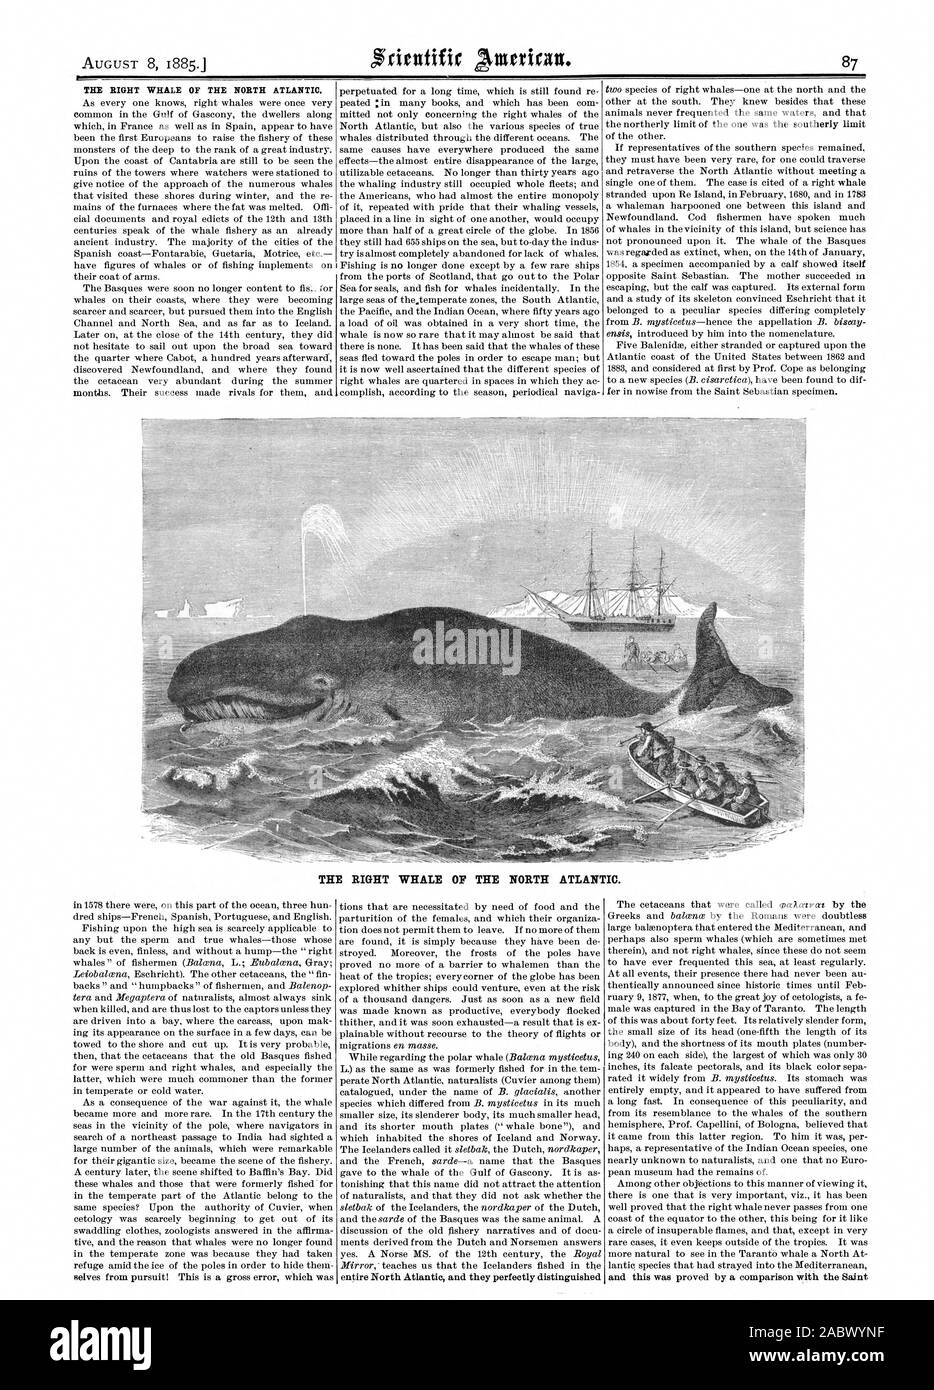 THE RIGHT WHALE OF THE NORTH ATLANTIC. THE RIGHT WHALE OF THE NORTH ATLANTIC., scientific american, 1885-08-08 Stock Photo